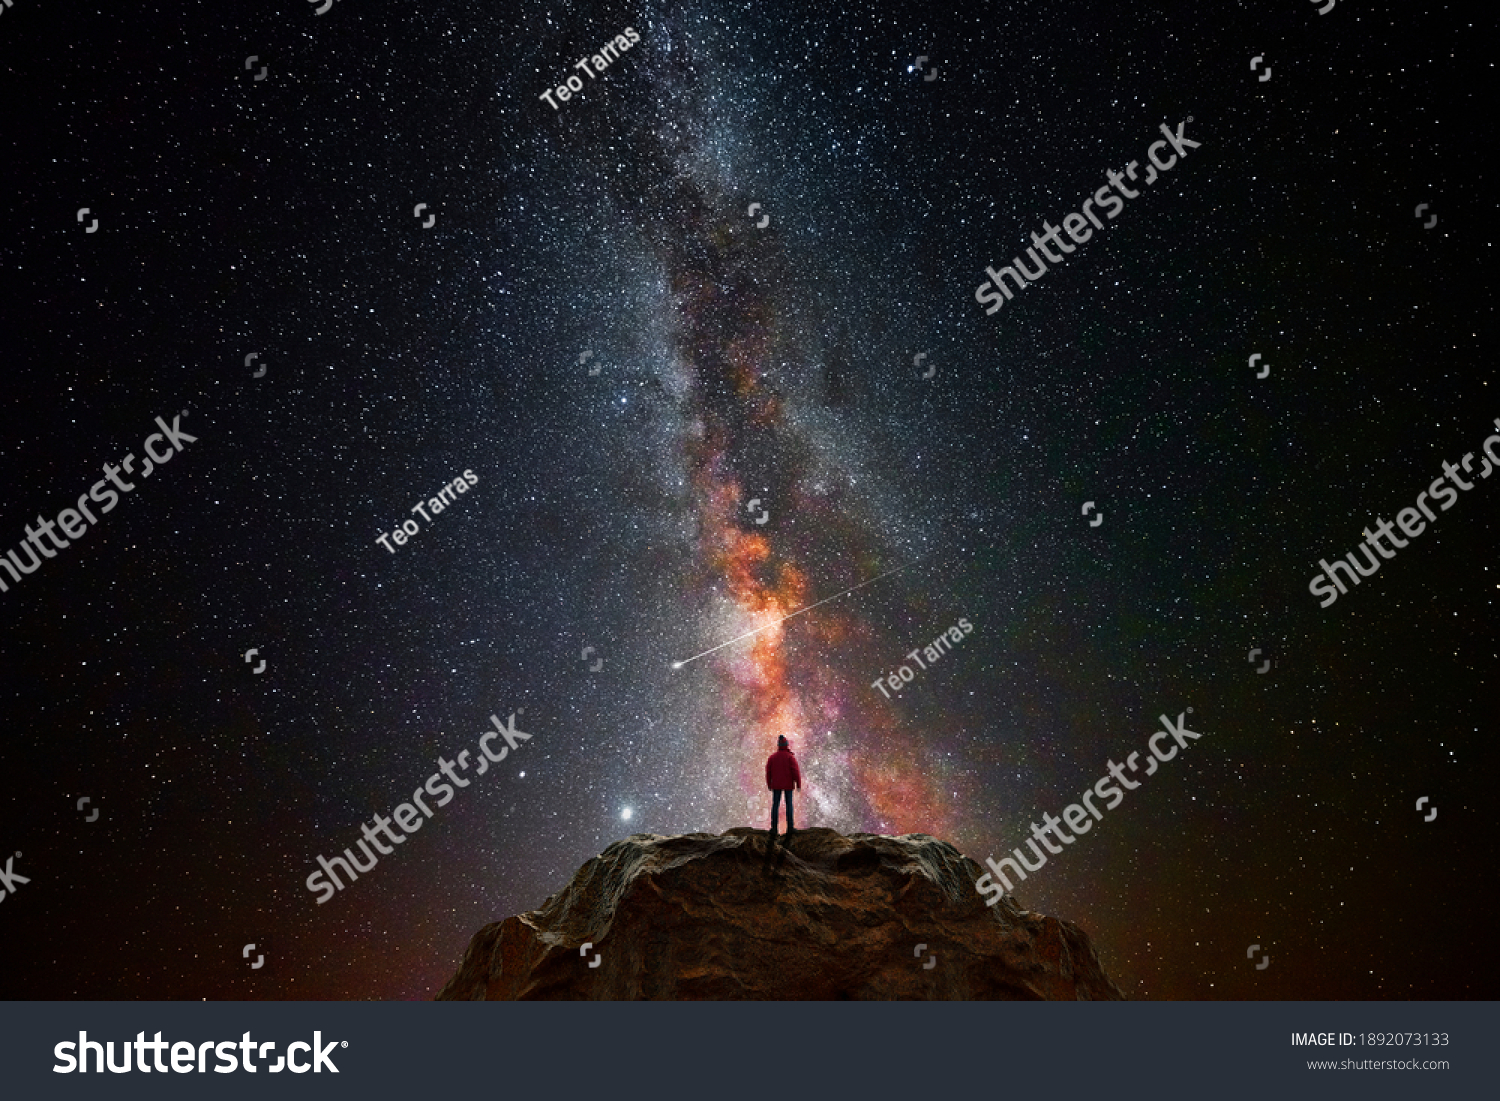 Man on top of a mountain observing the universe #1892073133